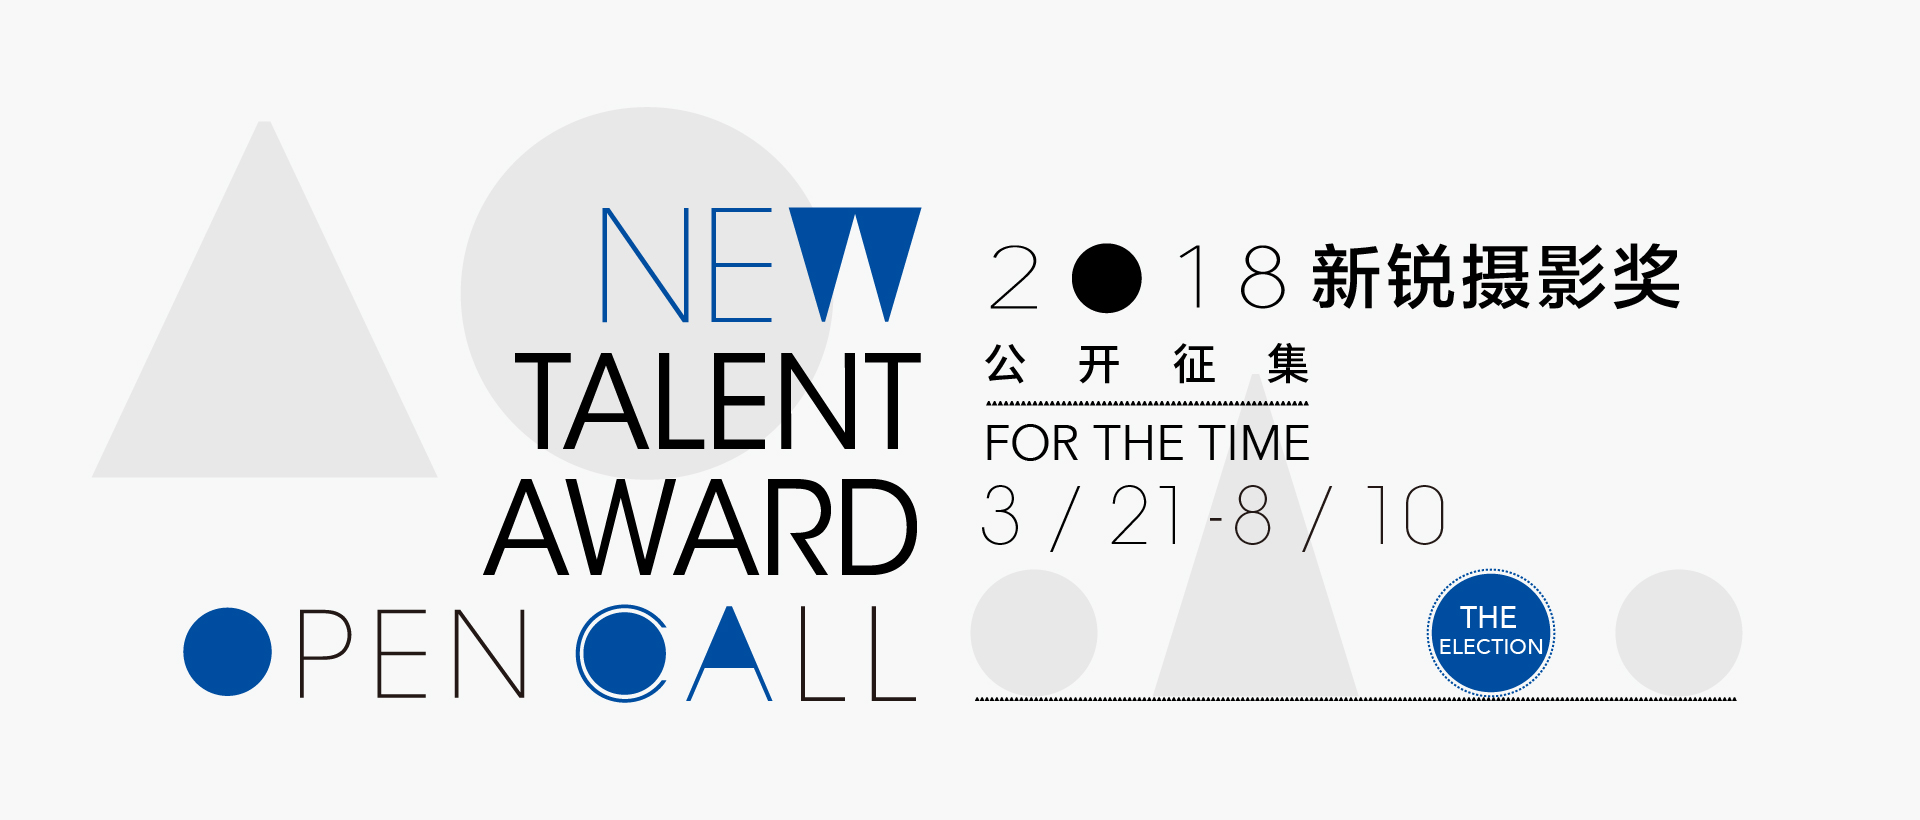 The 2018 New Talent Award is open to Chinese photographers under the age of 35 all over the world.